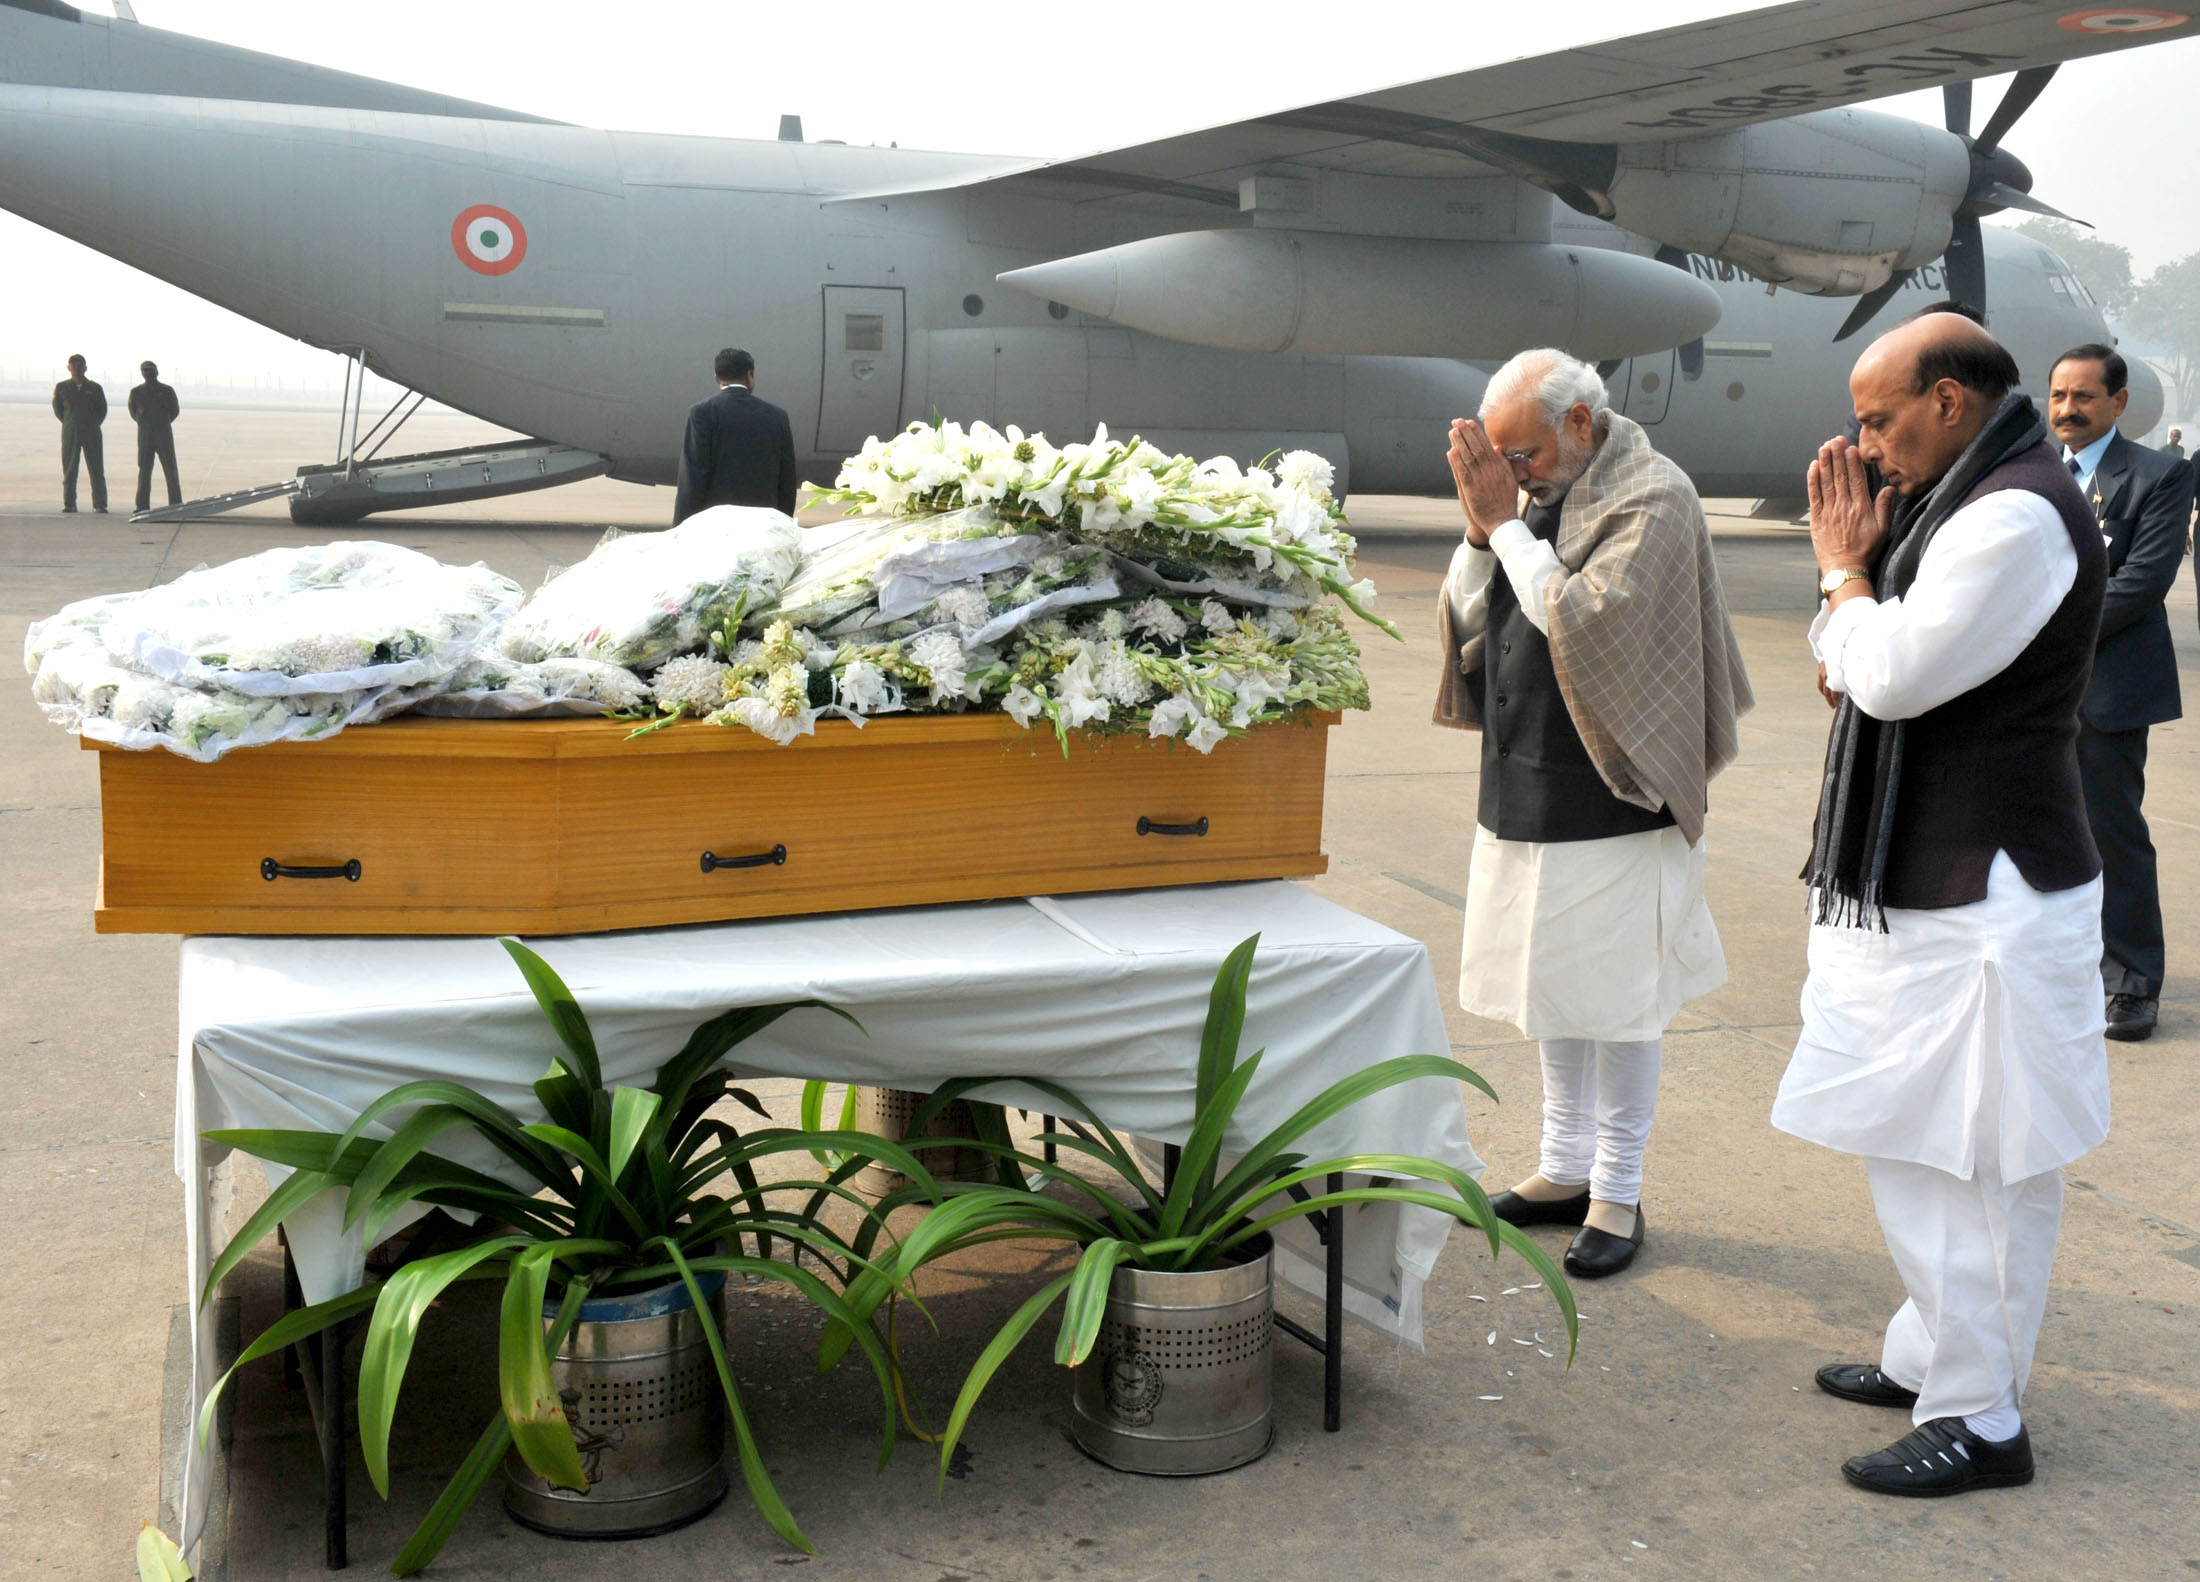 The Prime Minister, Shri Narendra Modi paying homage at the mortal remains of Shri Mufti Mohammad Sayeed, at Palam Airport, in New Delhi on January 07, 2016.   	The Union Home Minister, Shri Rajnath Singh is also seen.